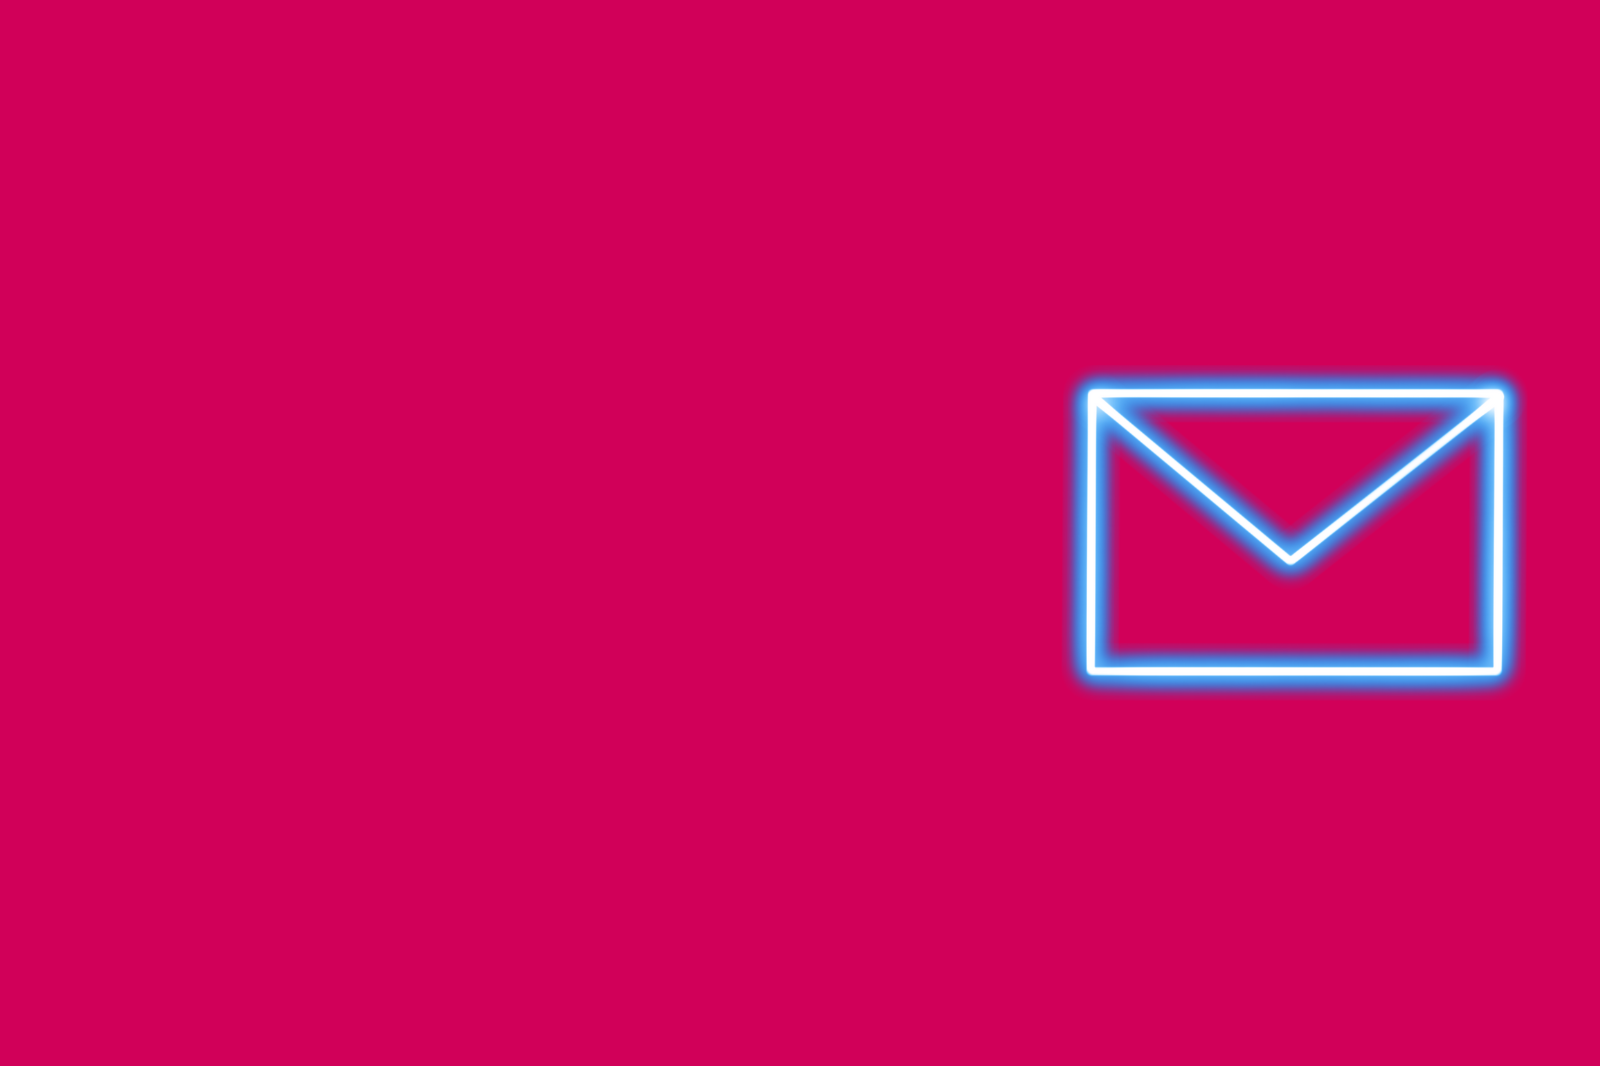 An email icon on a pink background representing the future of mail.